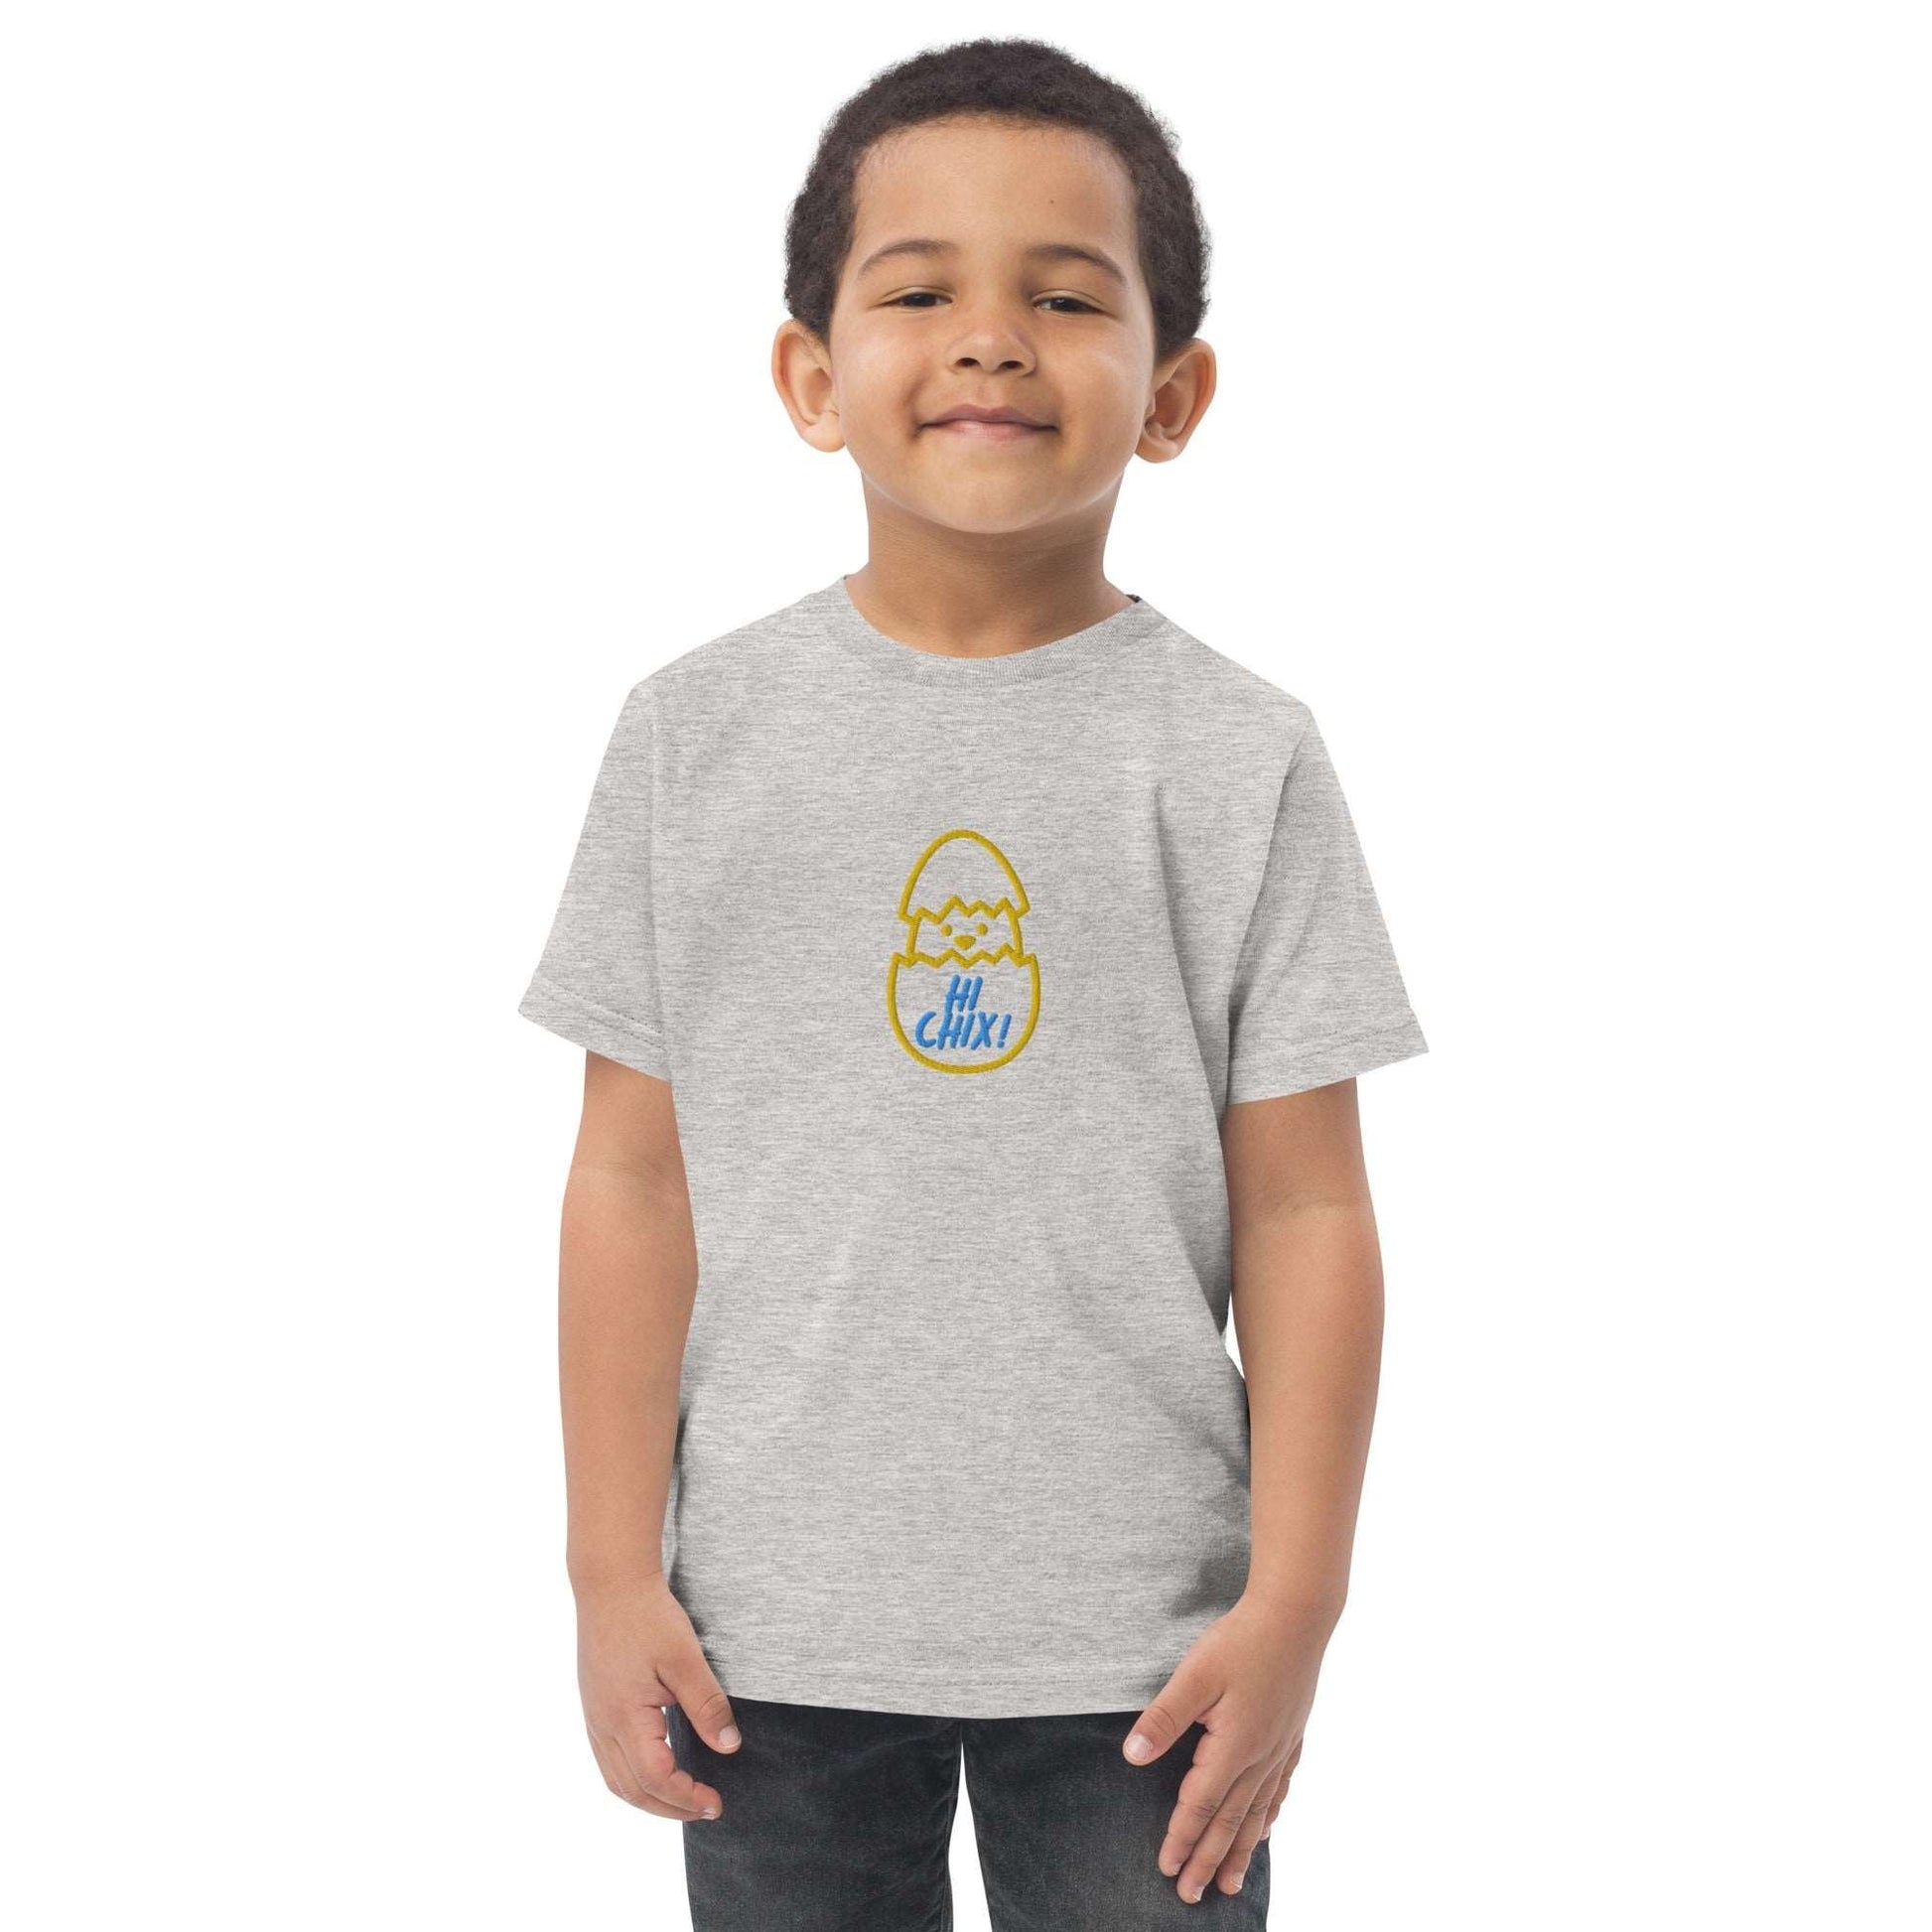 Hatching Chick in Blue and Yellow Toddler jersey t-shirt - Lizard Vigilante